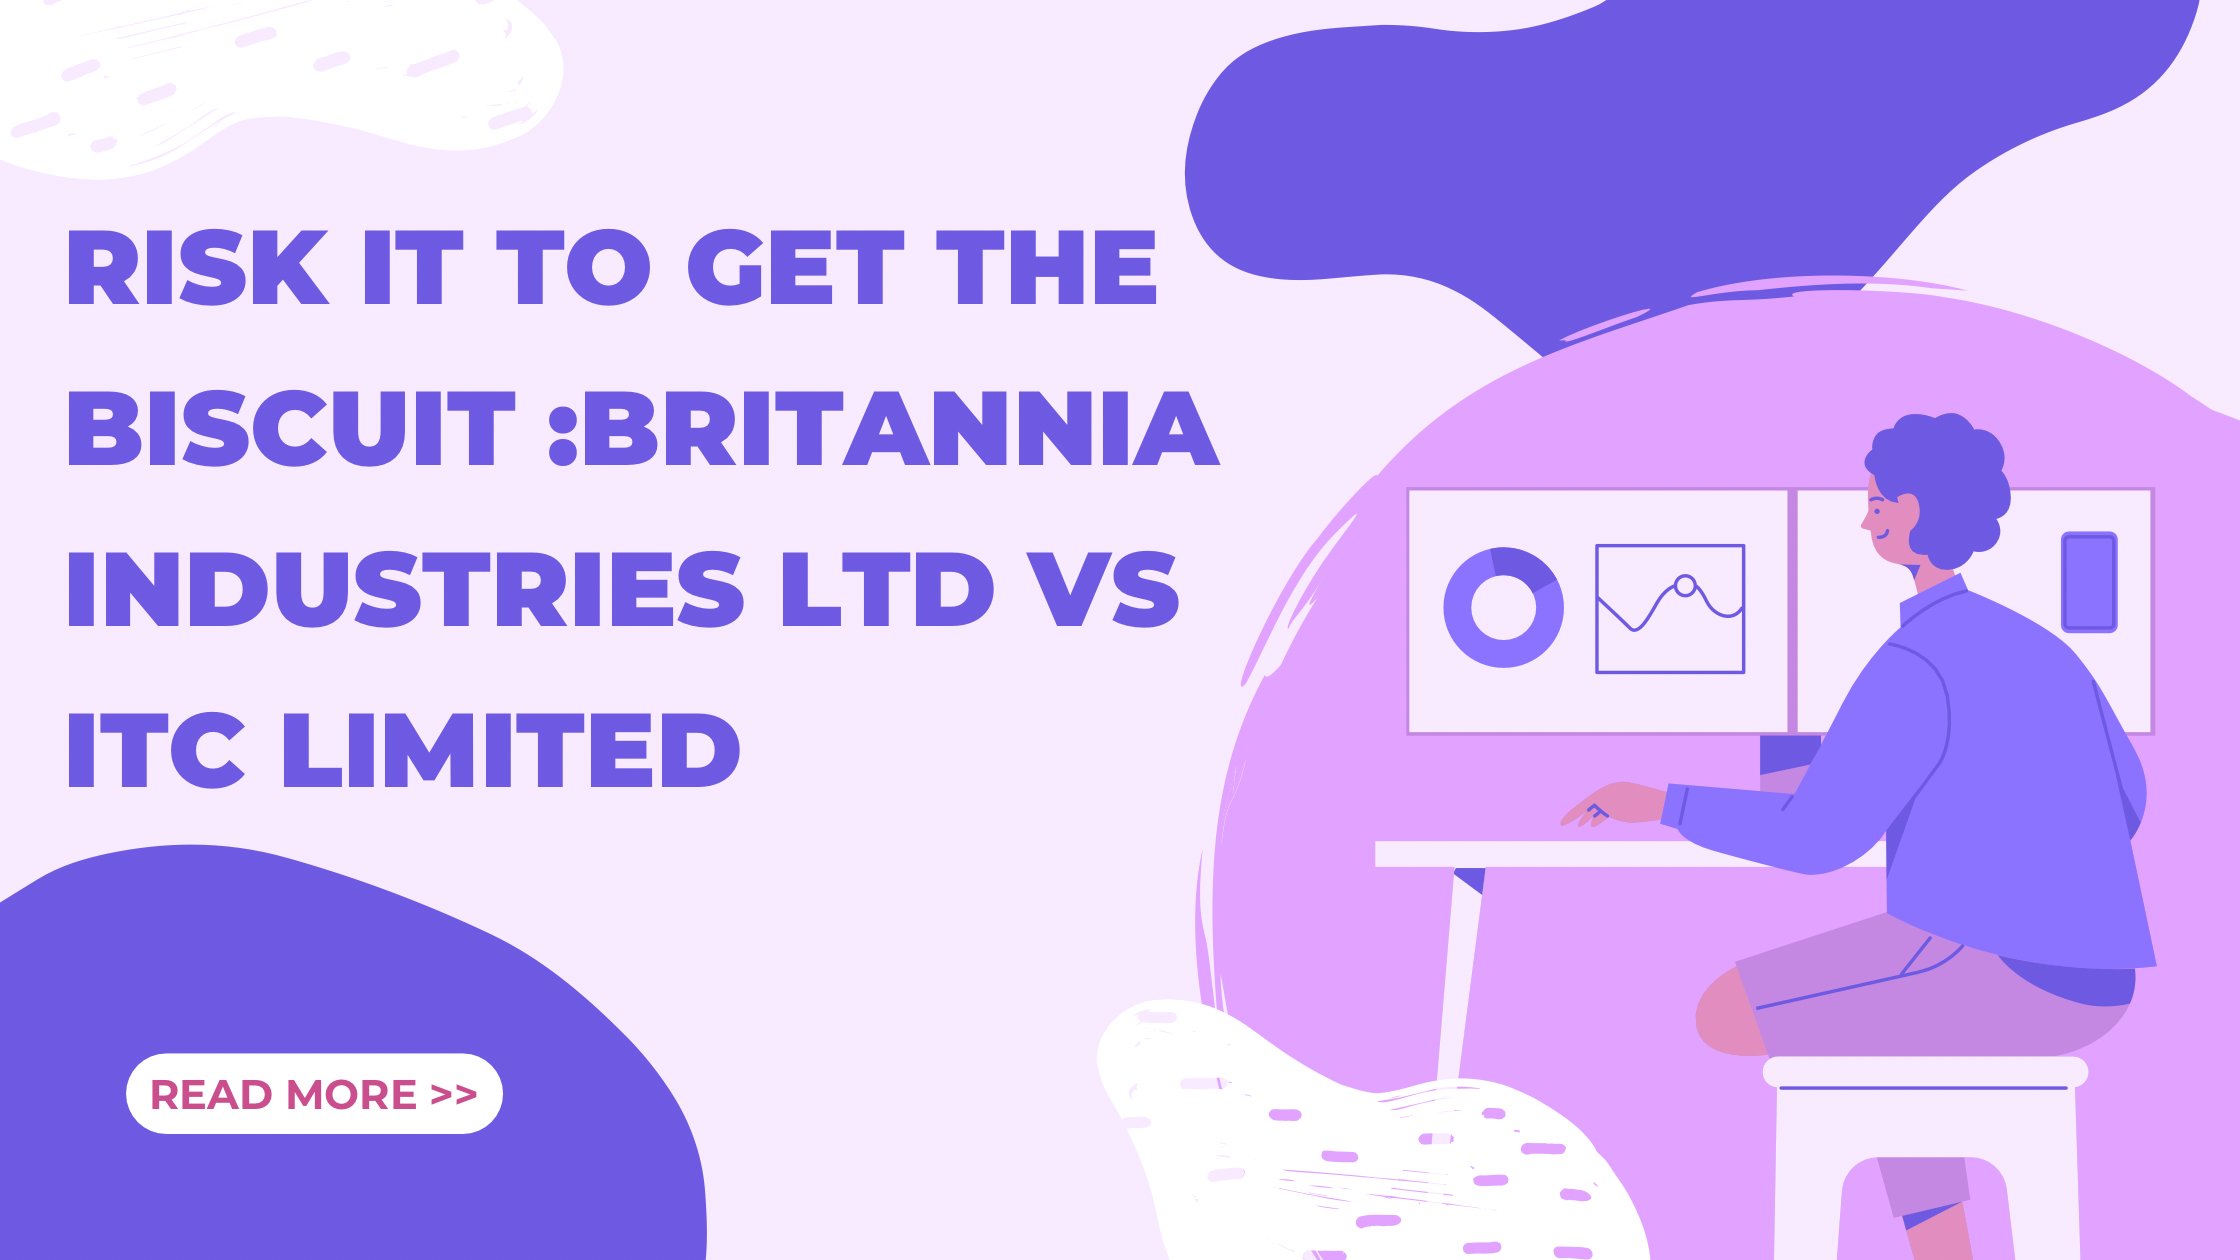 RISK IT TO GET THE BISCUIT :BRITANNIA INDUSTRIES Ltd Vs ITC LIMITED.